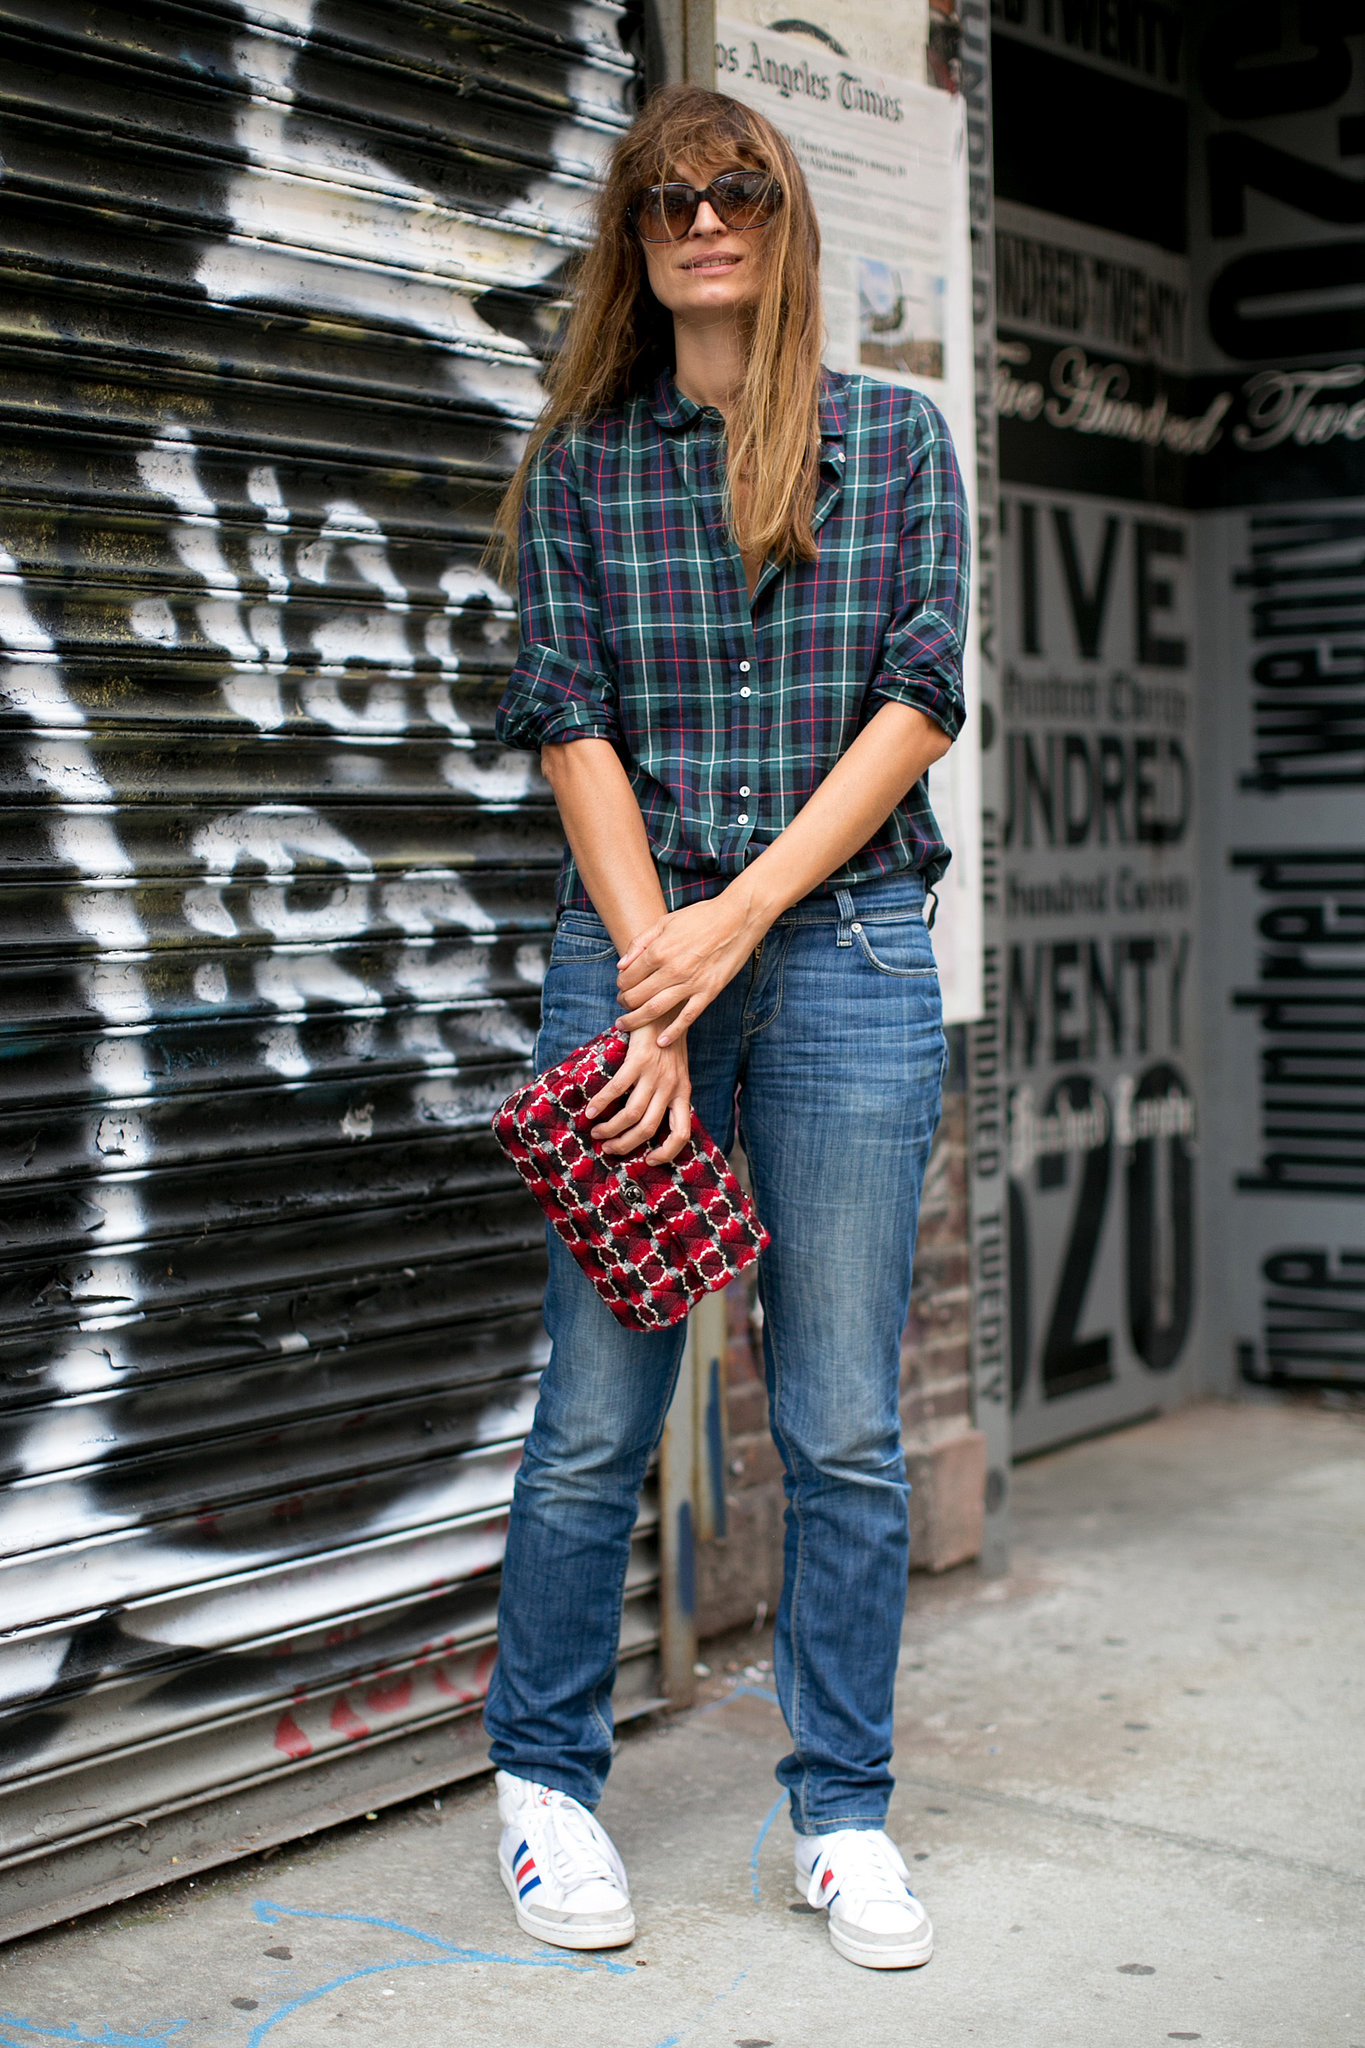 In plaid, sneakers, and denim, she gets our vote for one of the cutest casual looks at Fashion Week.
